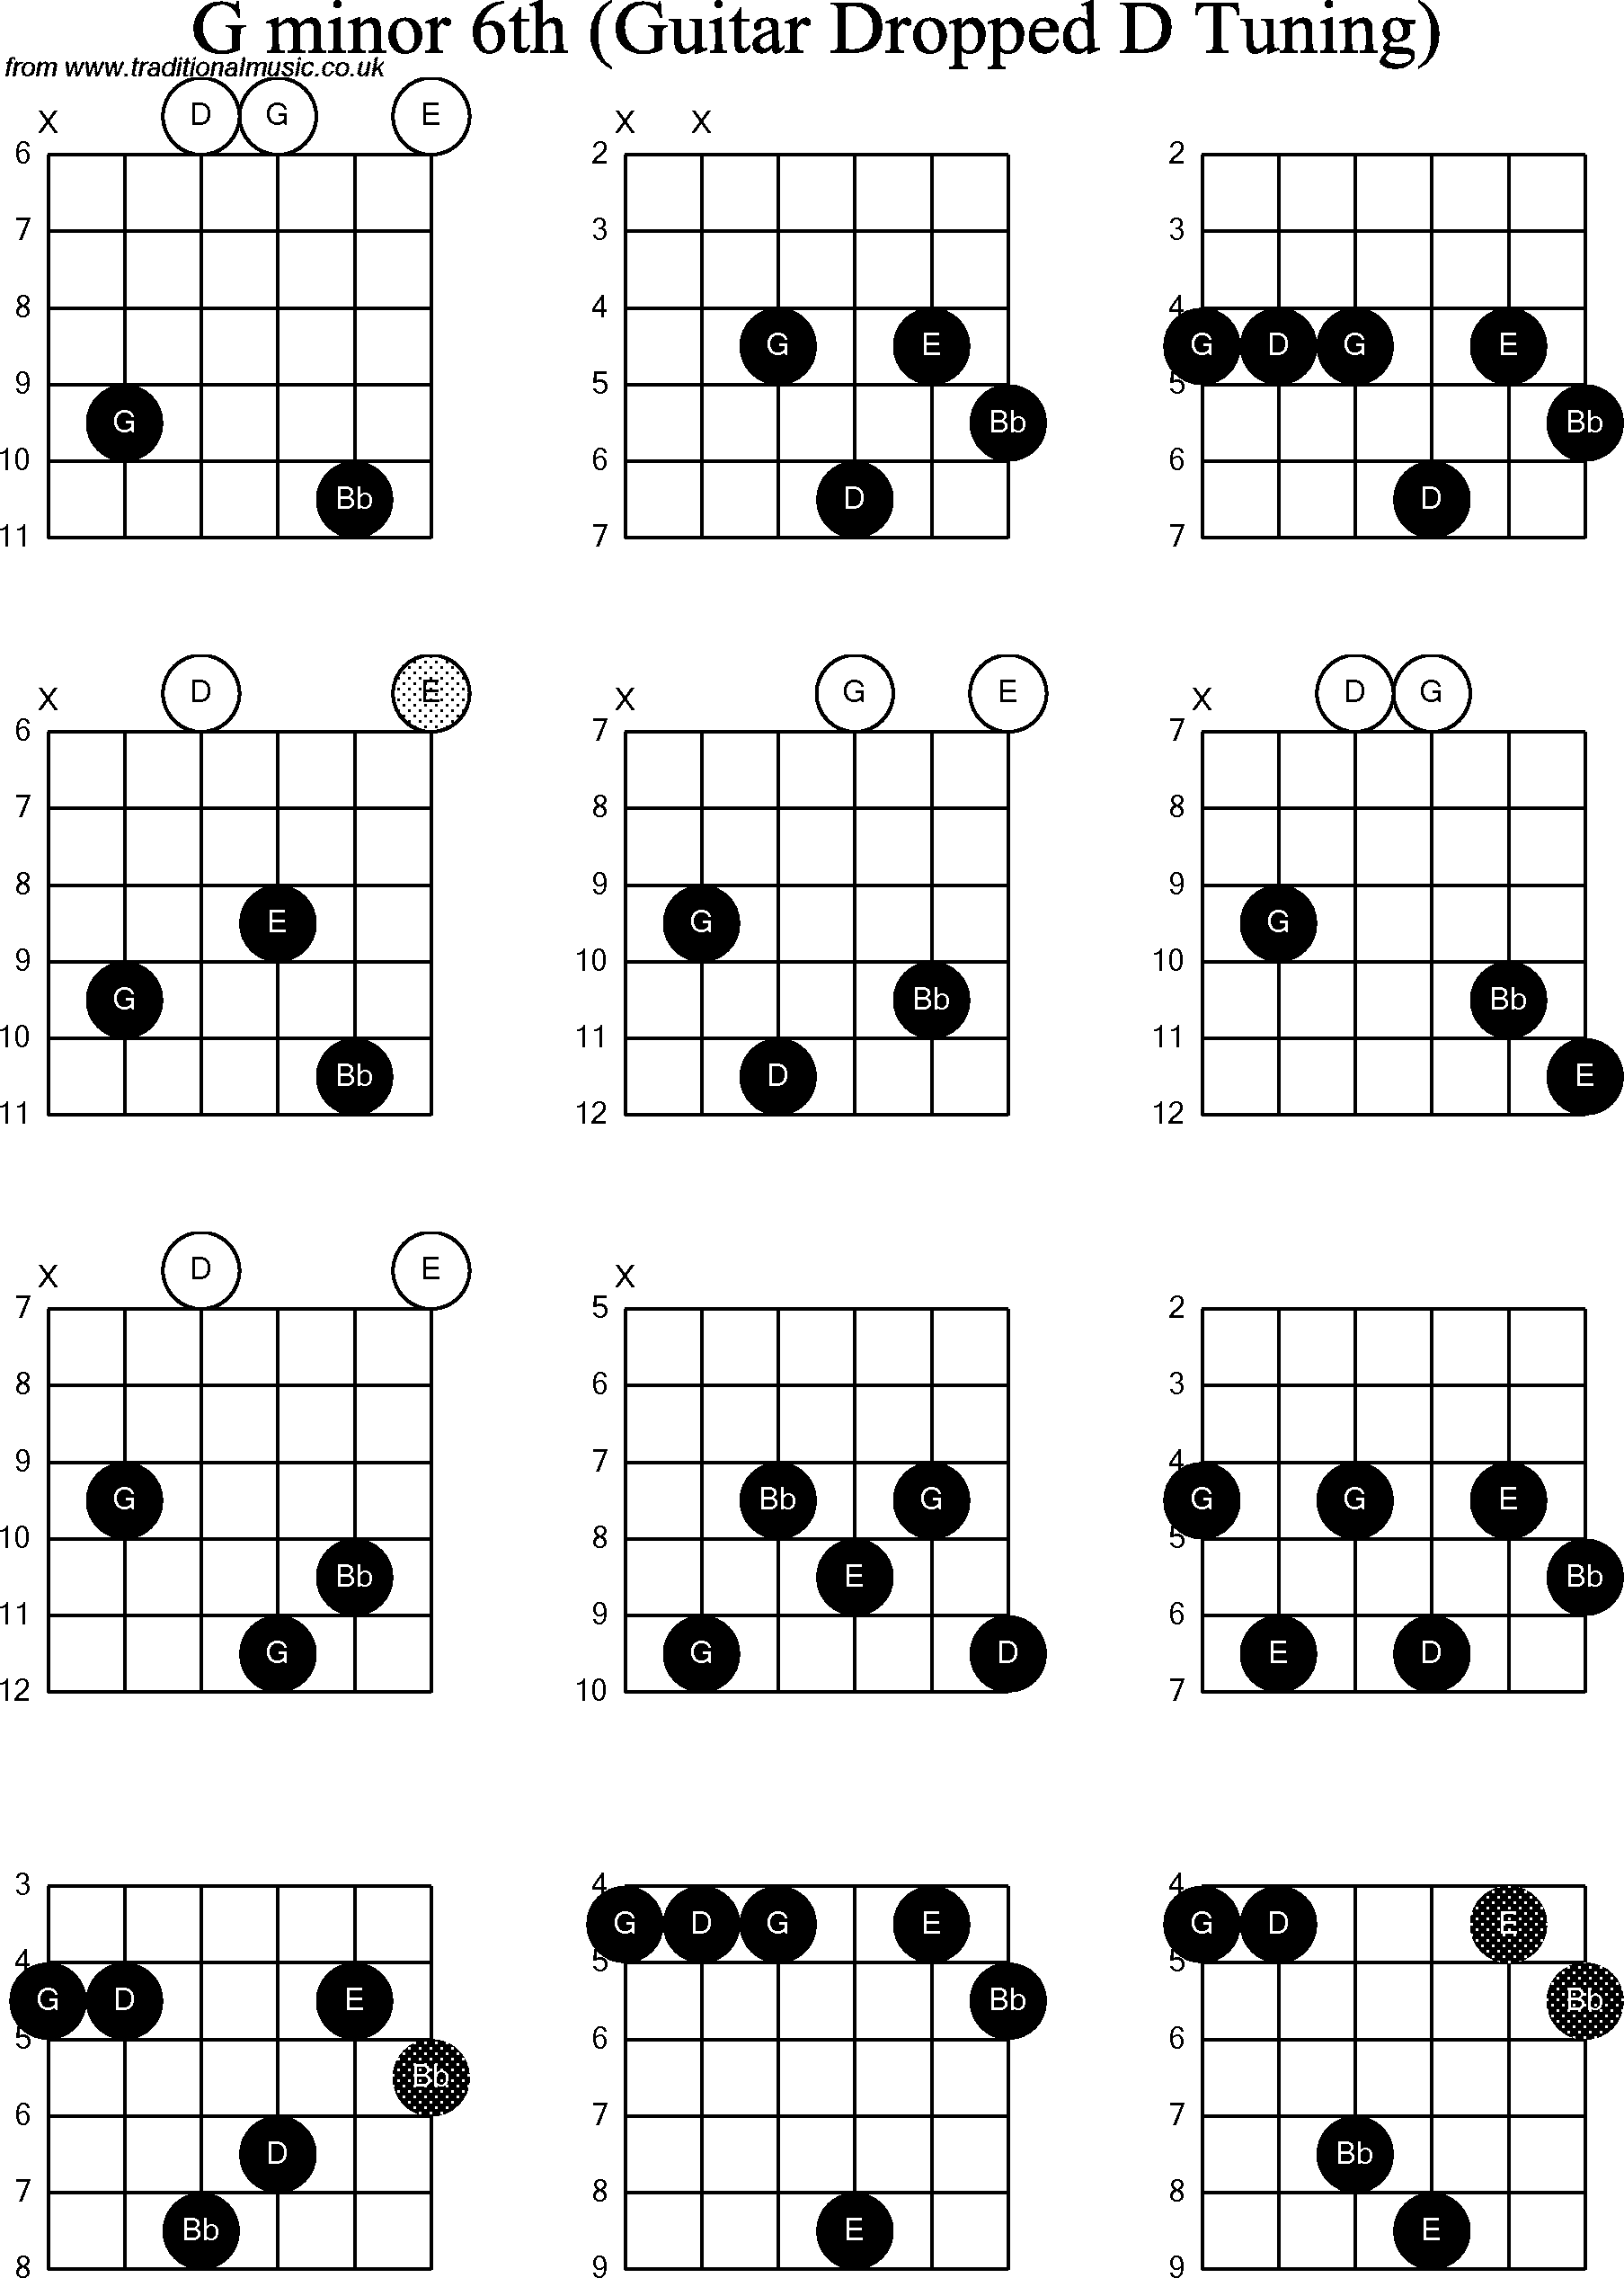 Chord diagrams for Dropped D Guitar(DADGBE), F Sharp Minor7th